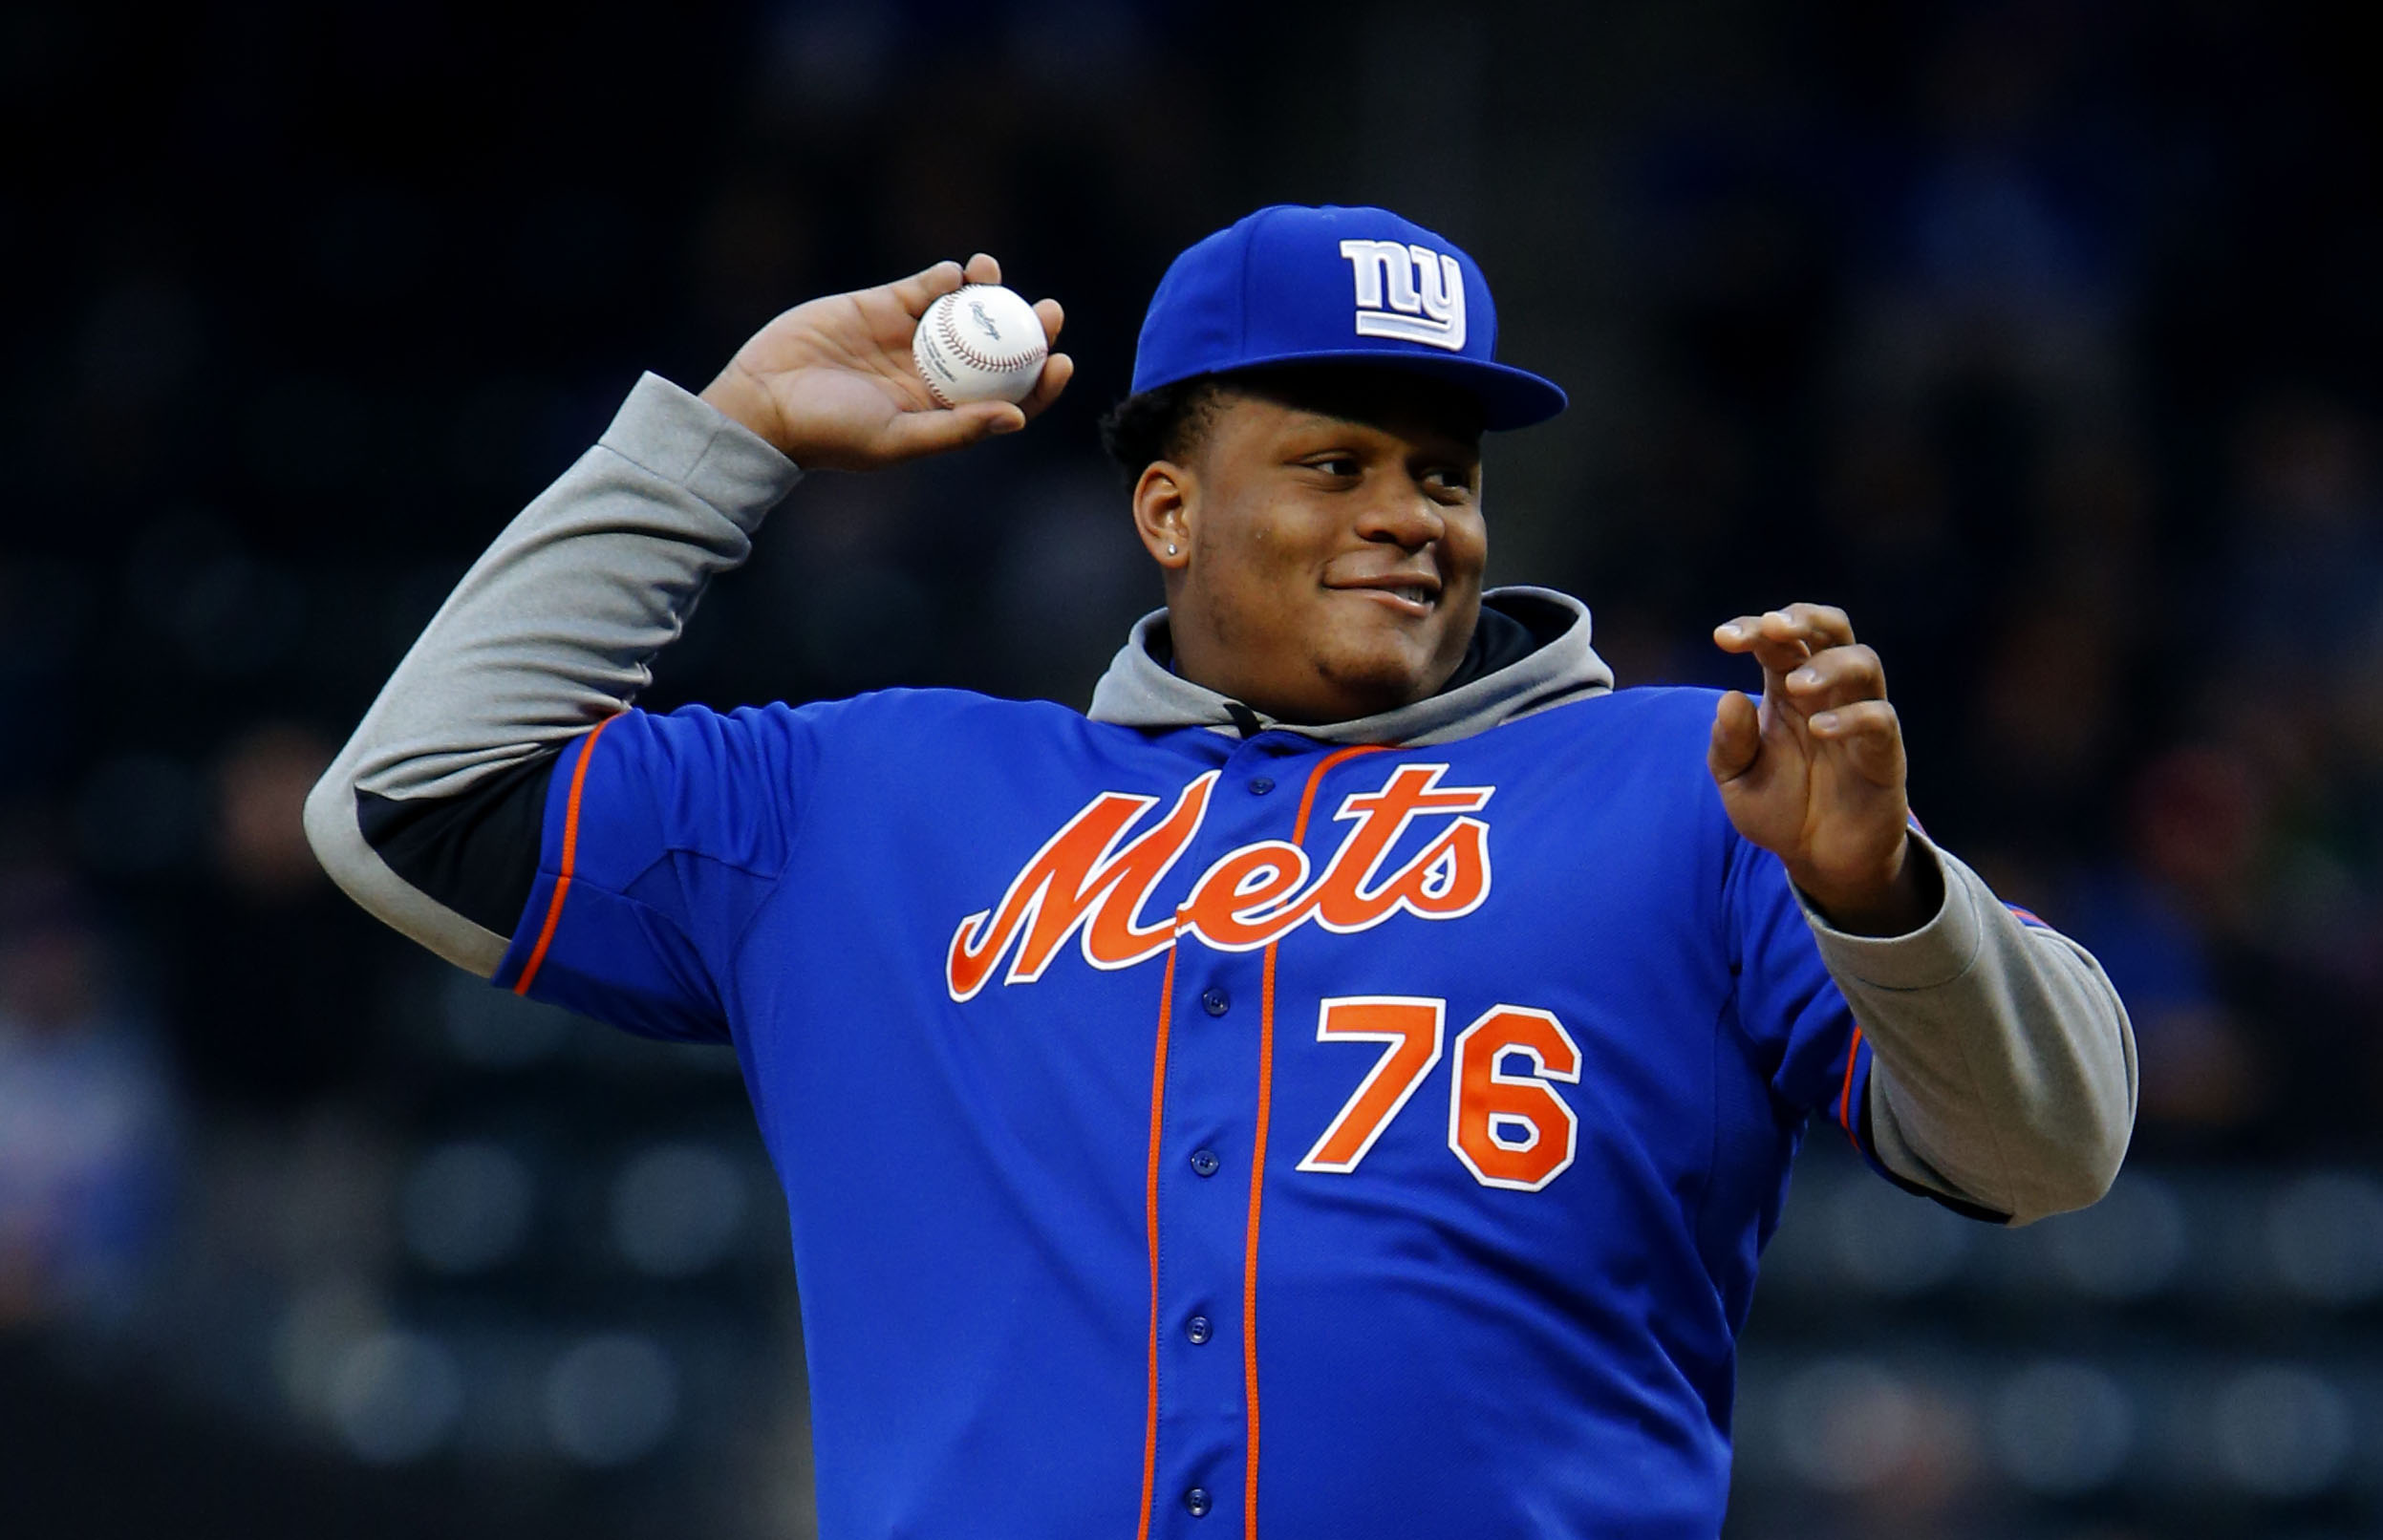 Ereck Flowers threw out the first pitch at Citi Field Friday night